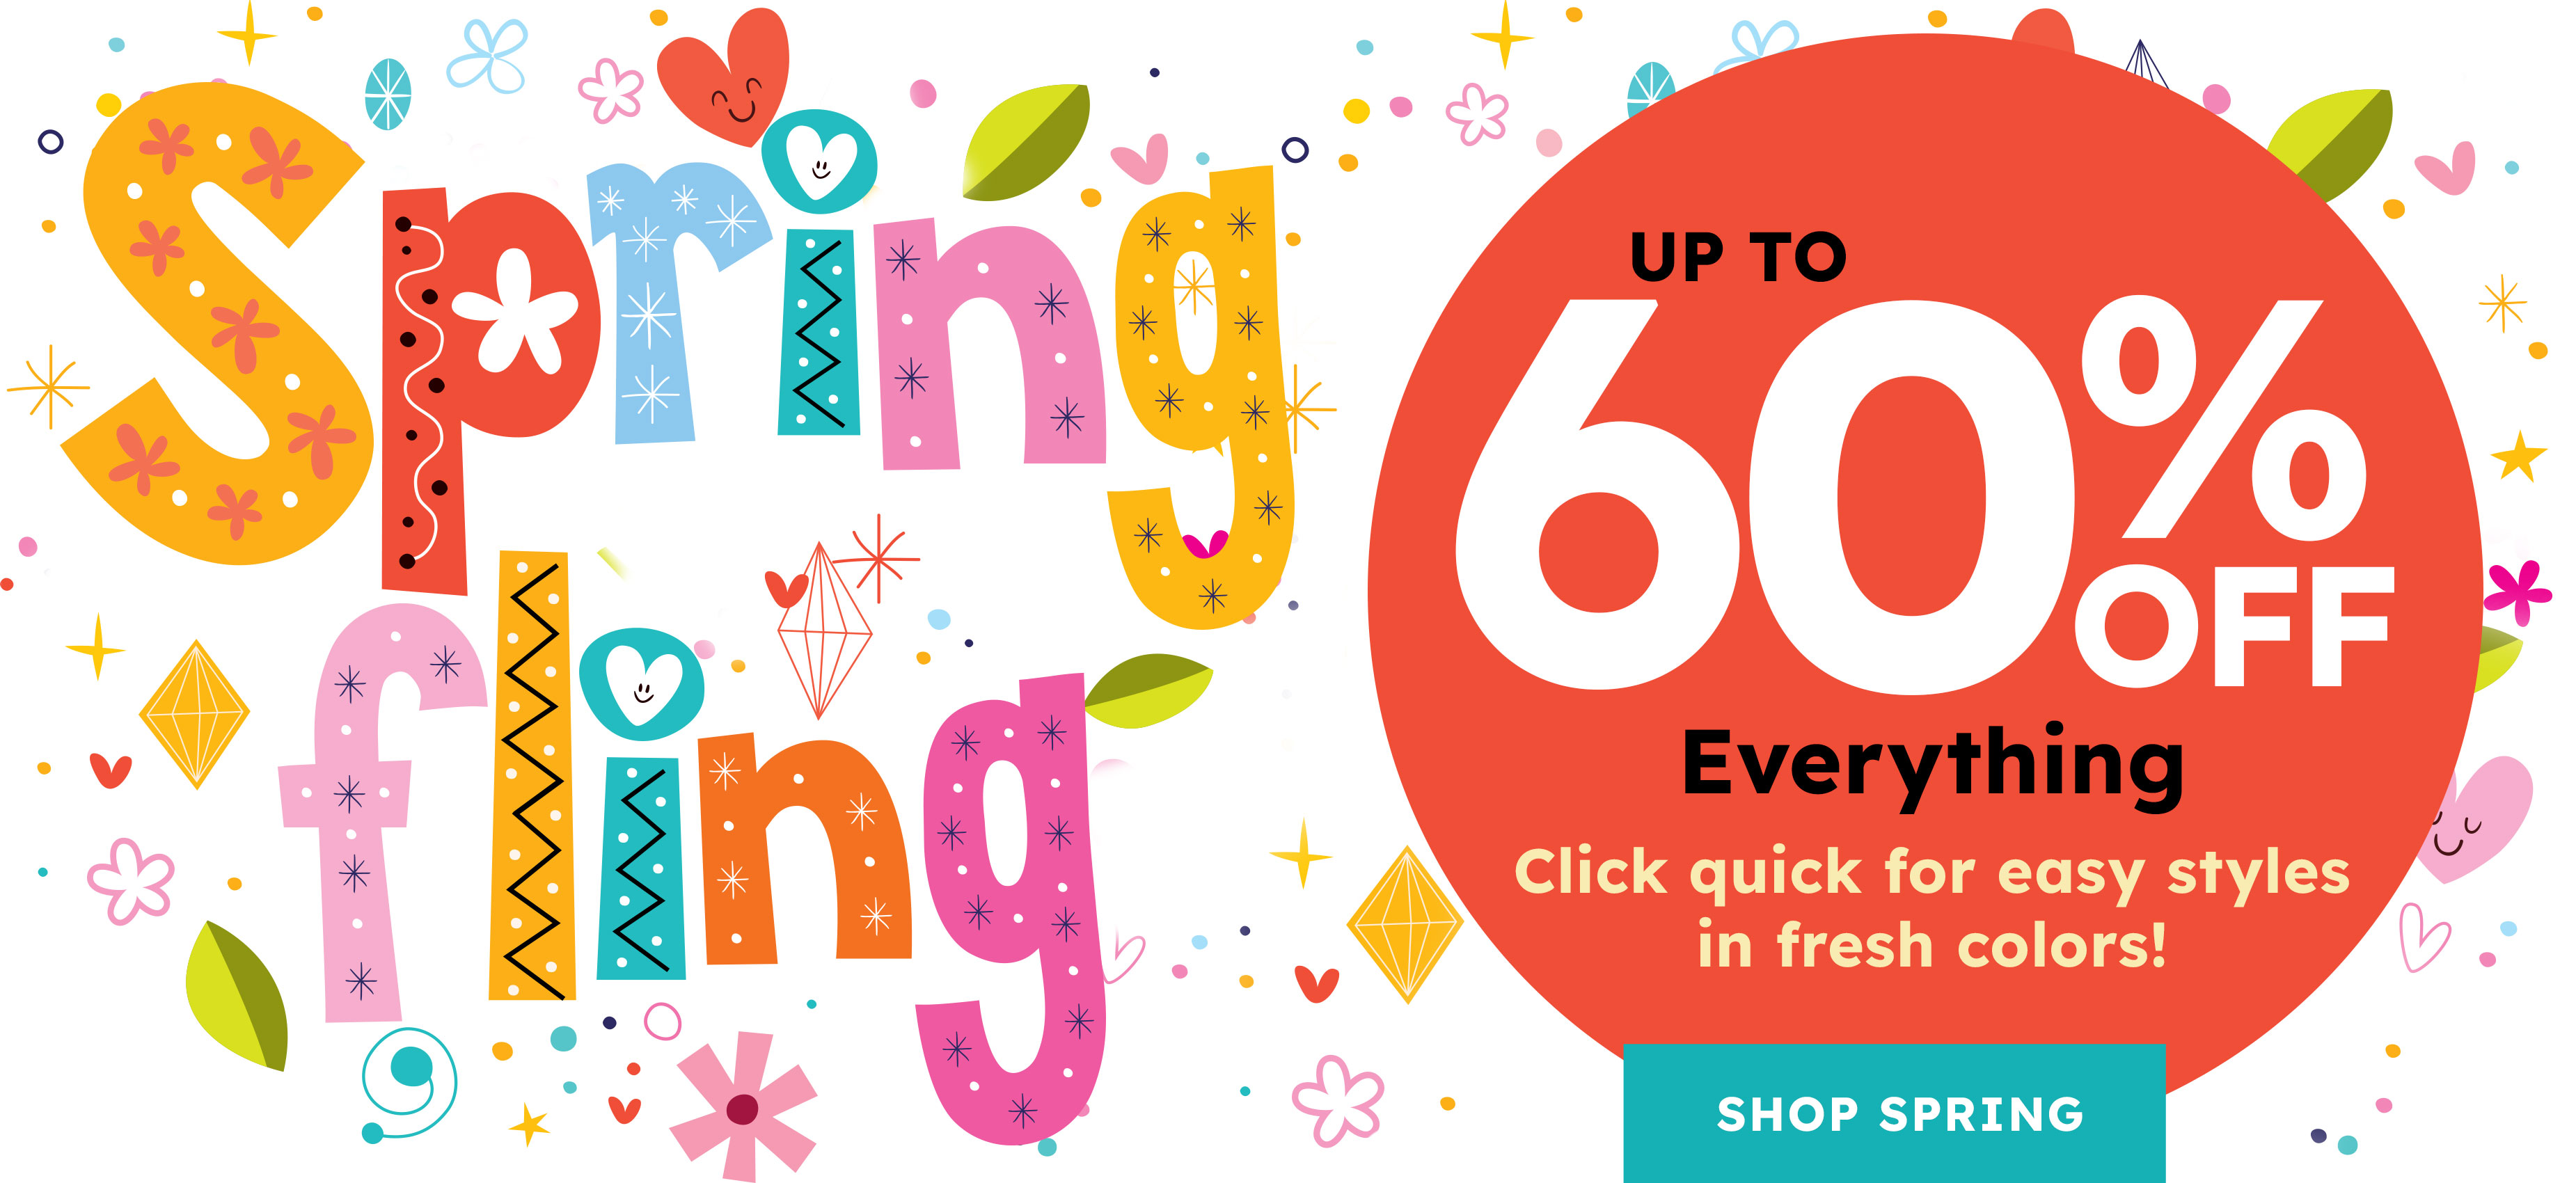 Spring fling up to 60% off everything. Click quick for easy styles in fresh colors shop spring